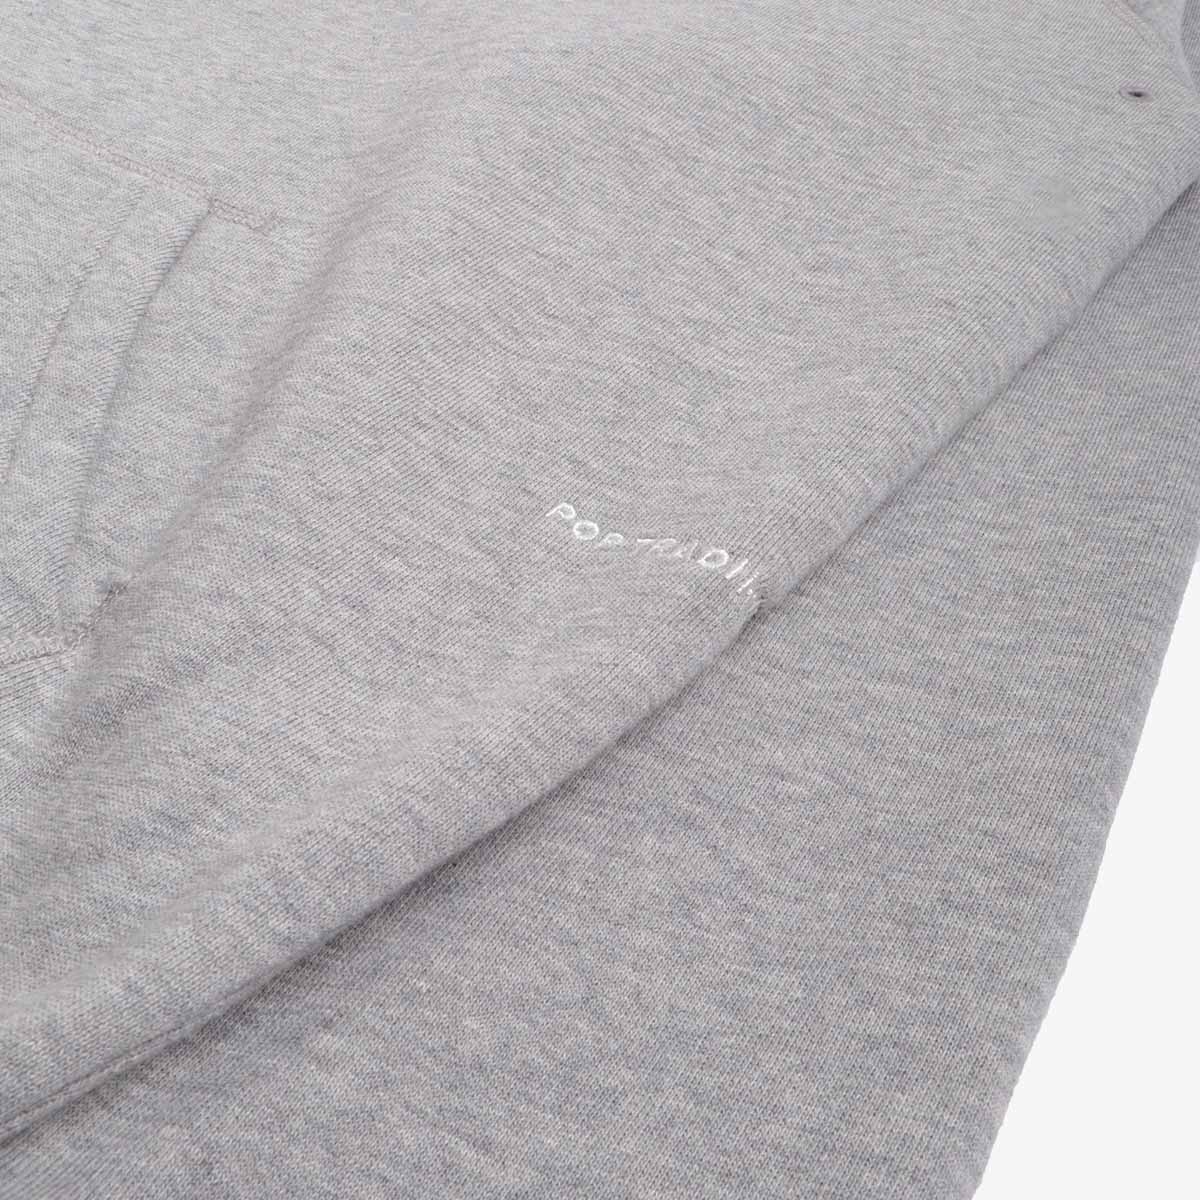 Pop Trading Company College P Hoodie, Grey Heather, Detail Shot 7